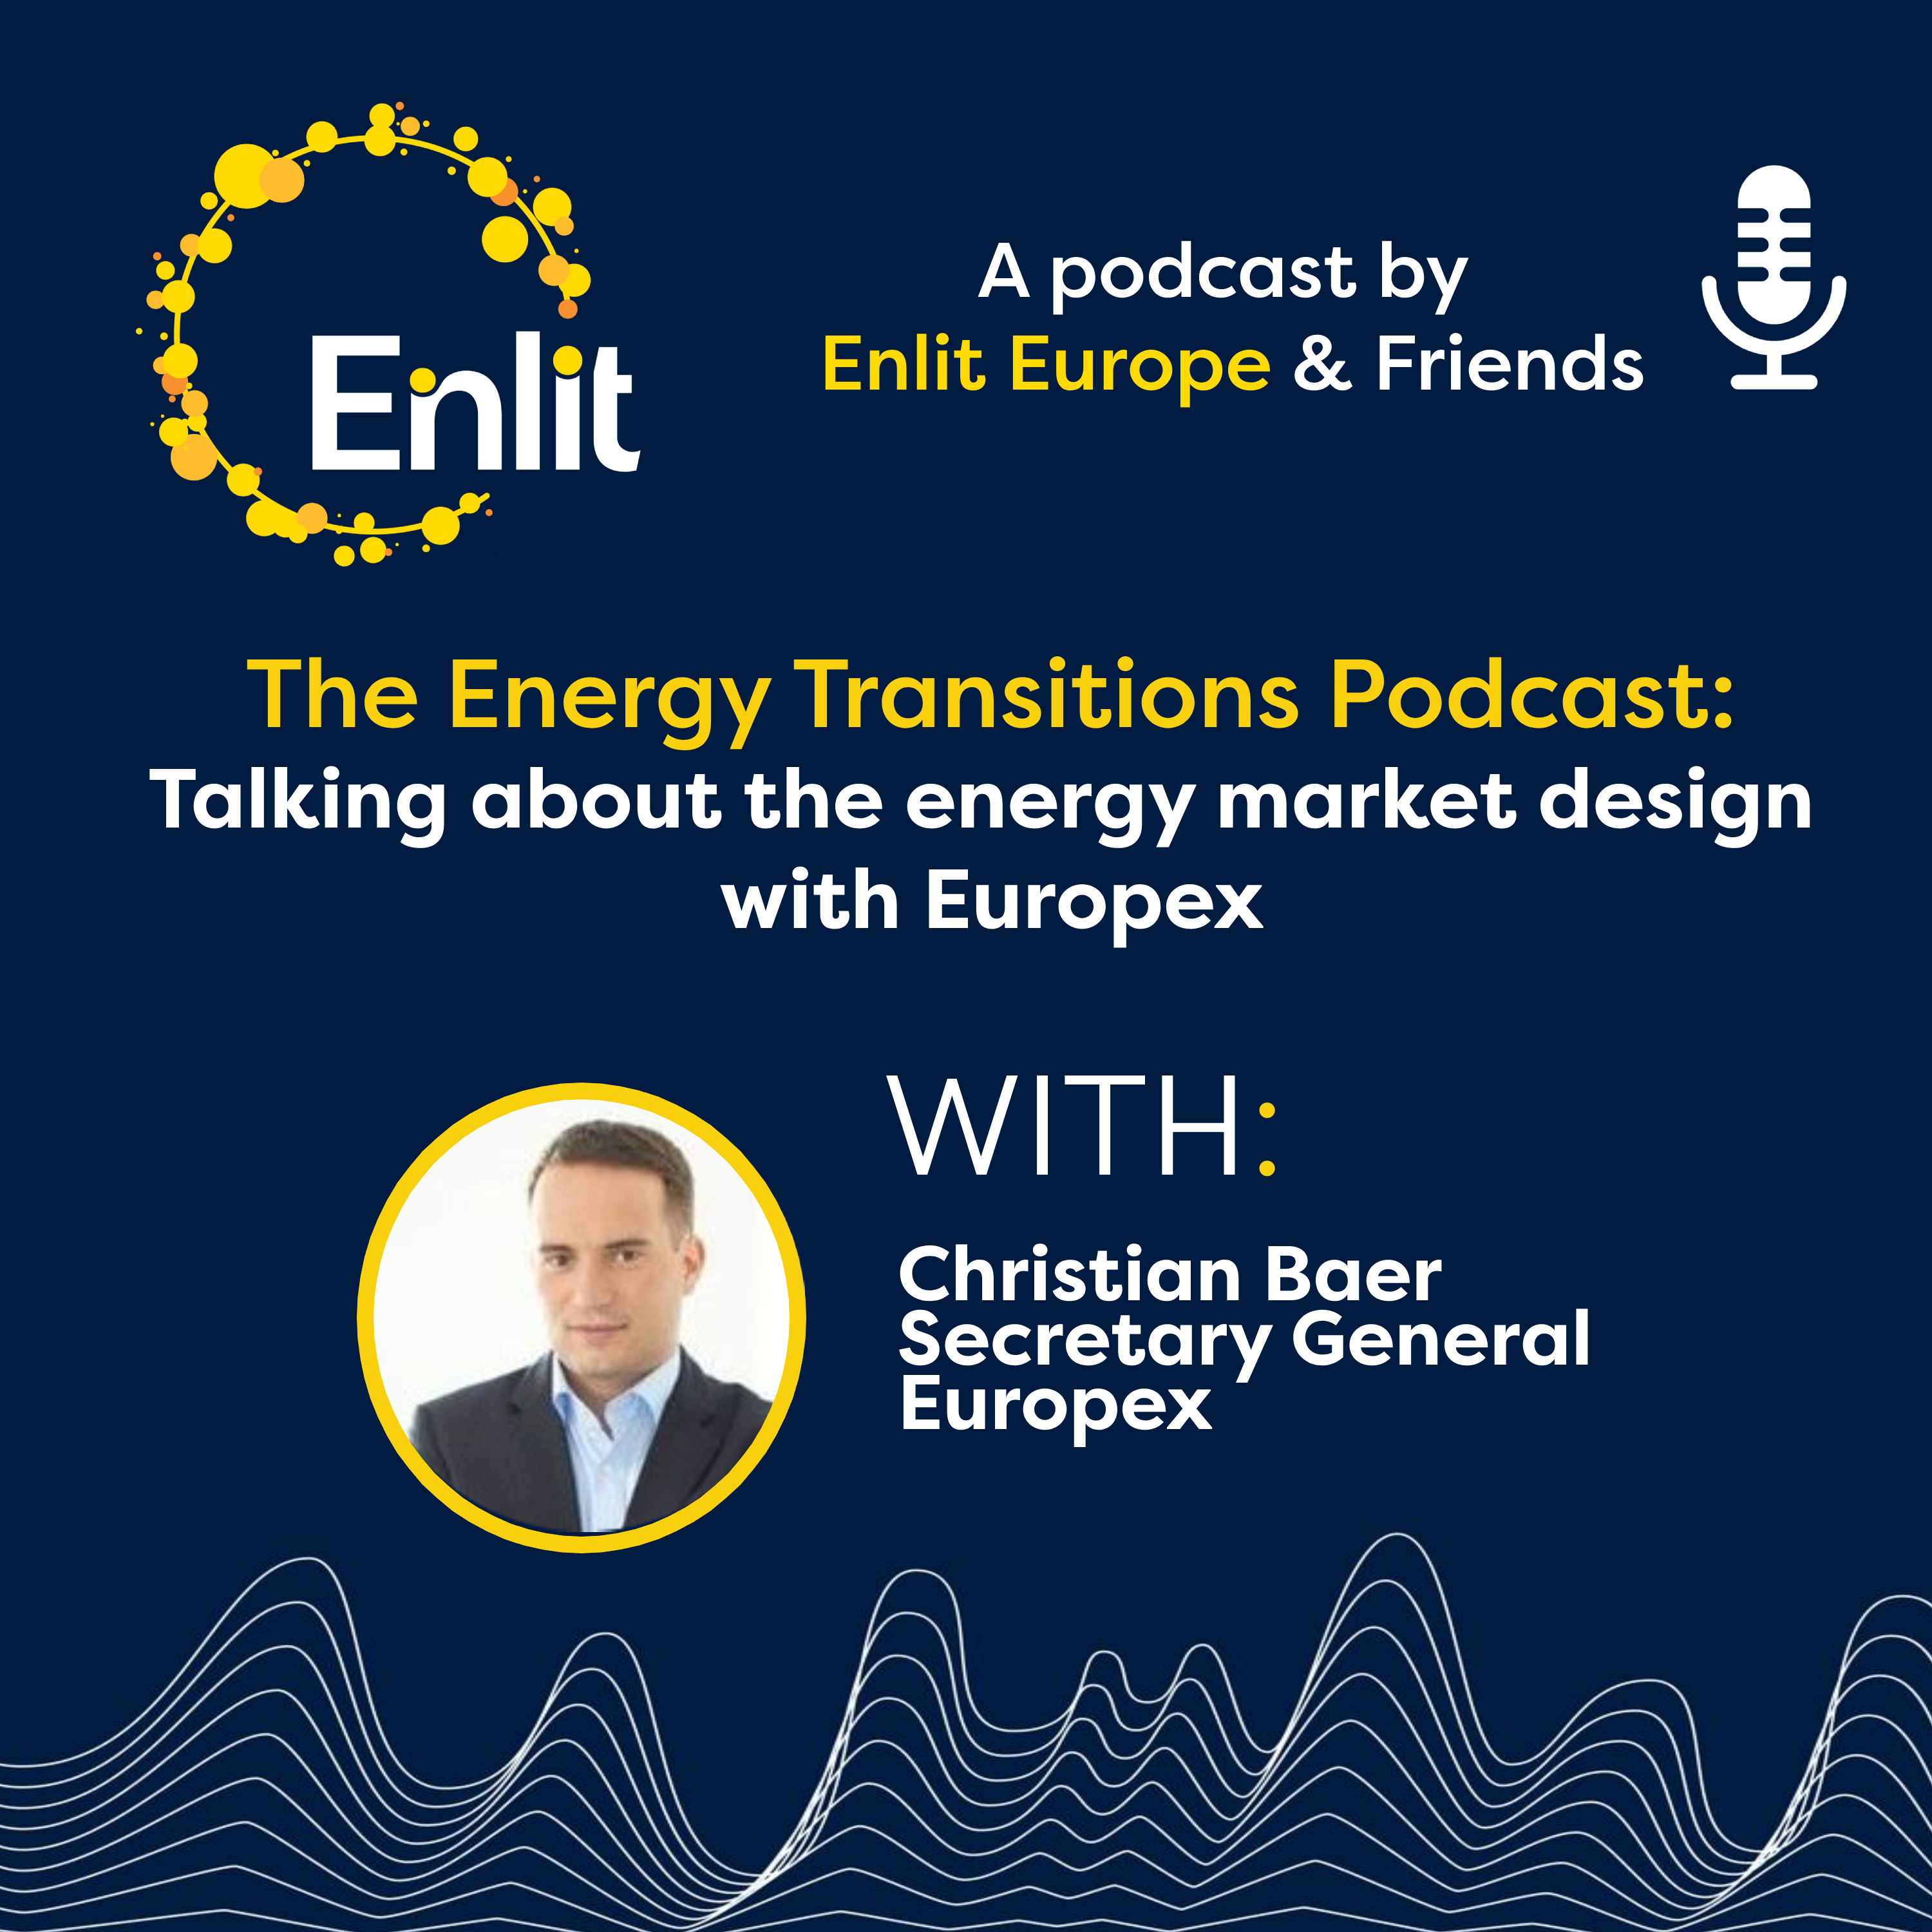 Talking about the energy market design with Europex